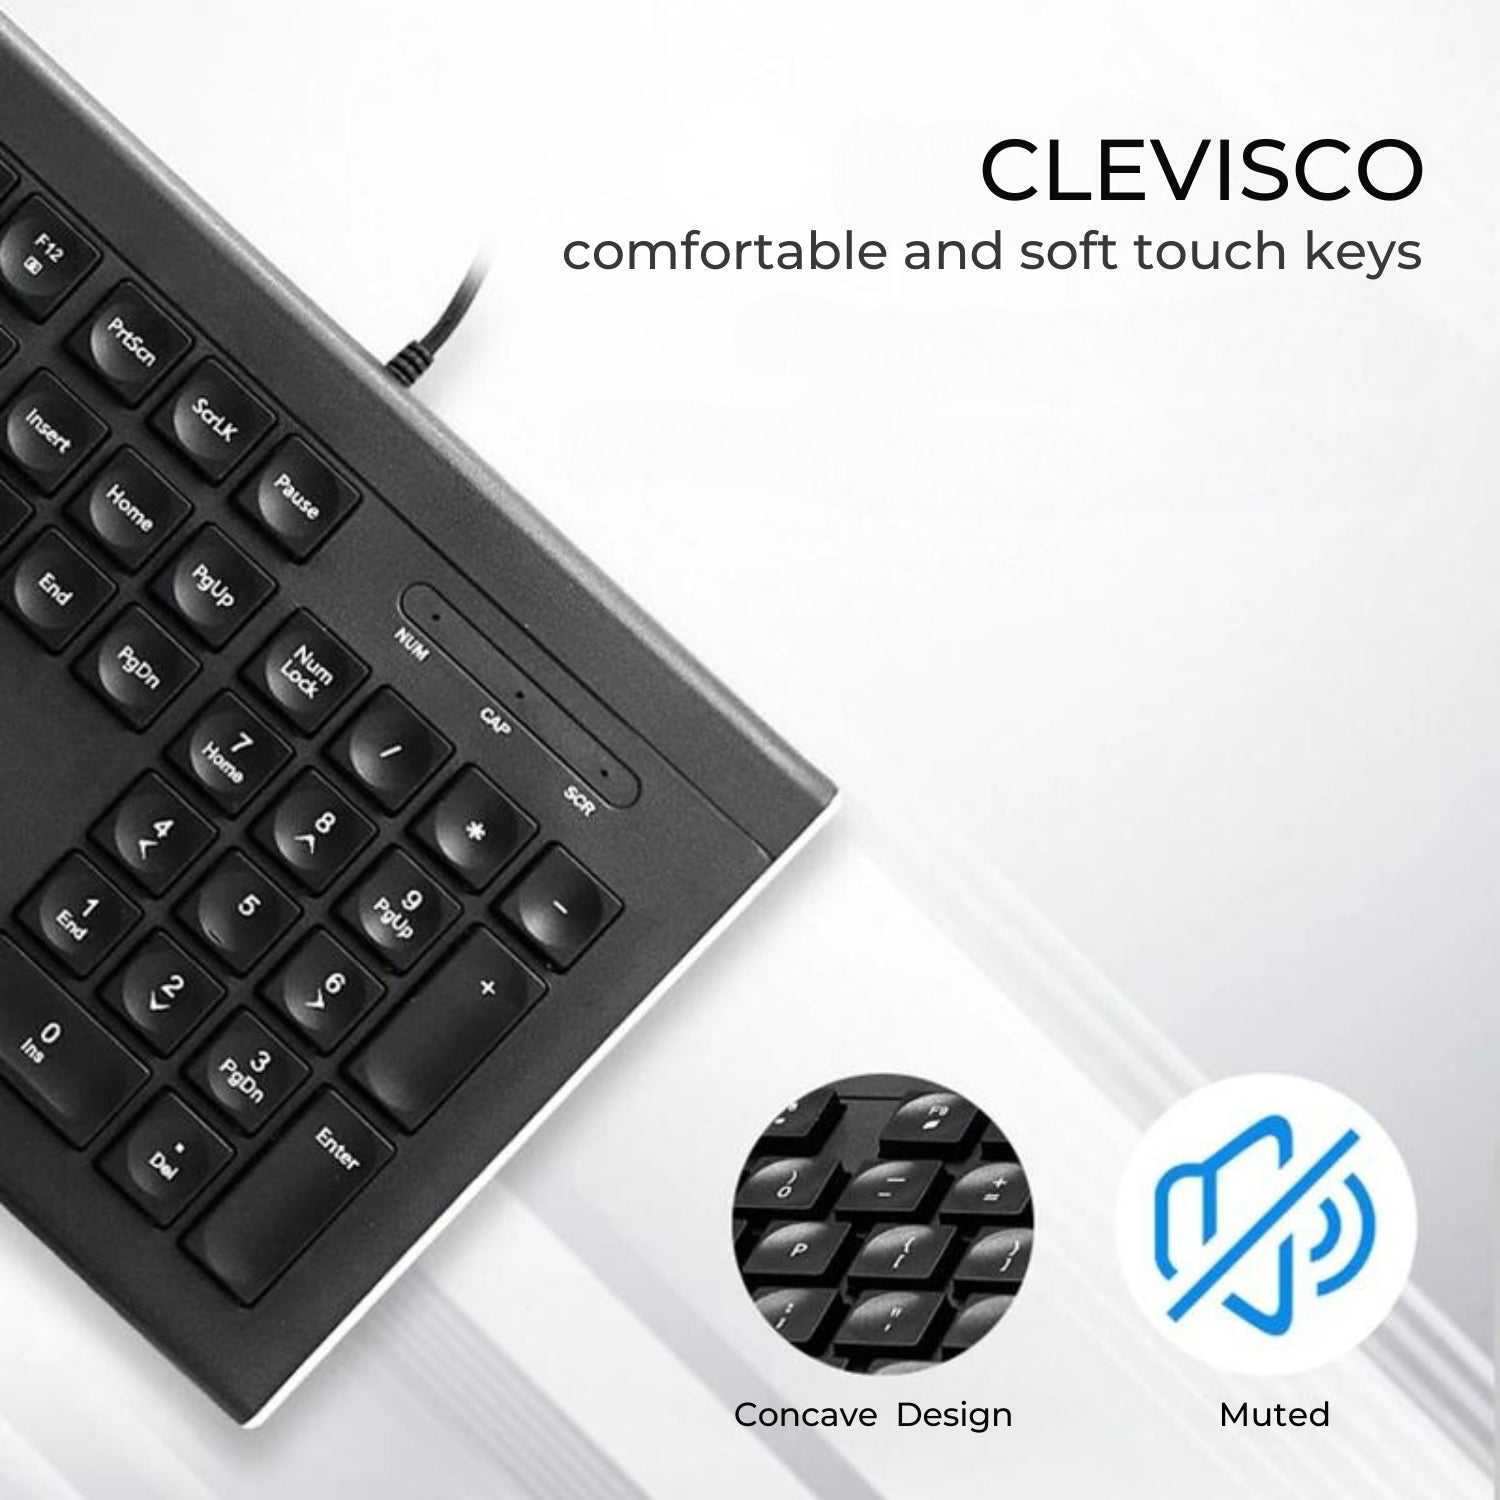 The image showcases a Clevisco ergonomic keyboard with comfortable and soft touch keys in a workspace. The keyboard’s sleek design and the concave design of the keys are highlighted. The image emphasizes quiet typing, making the workspace efficient and relaxed.